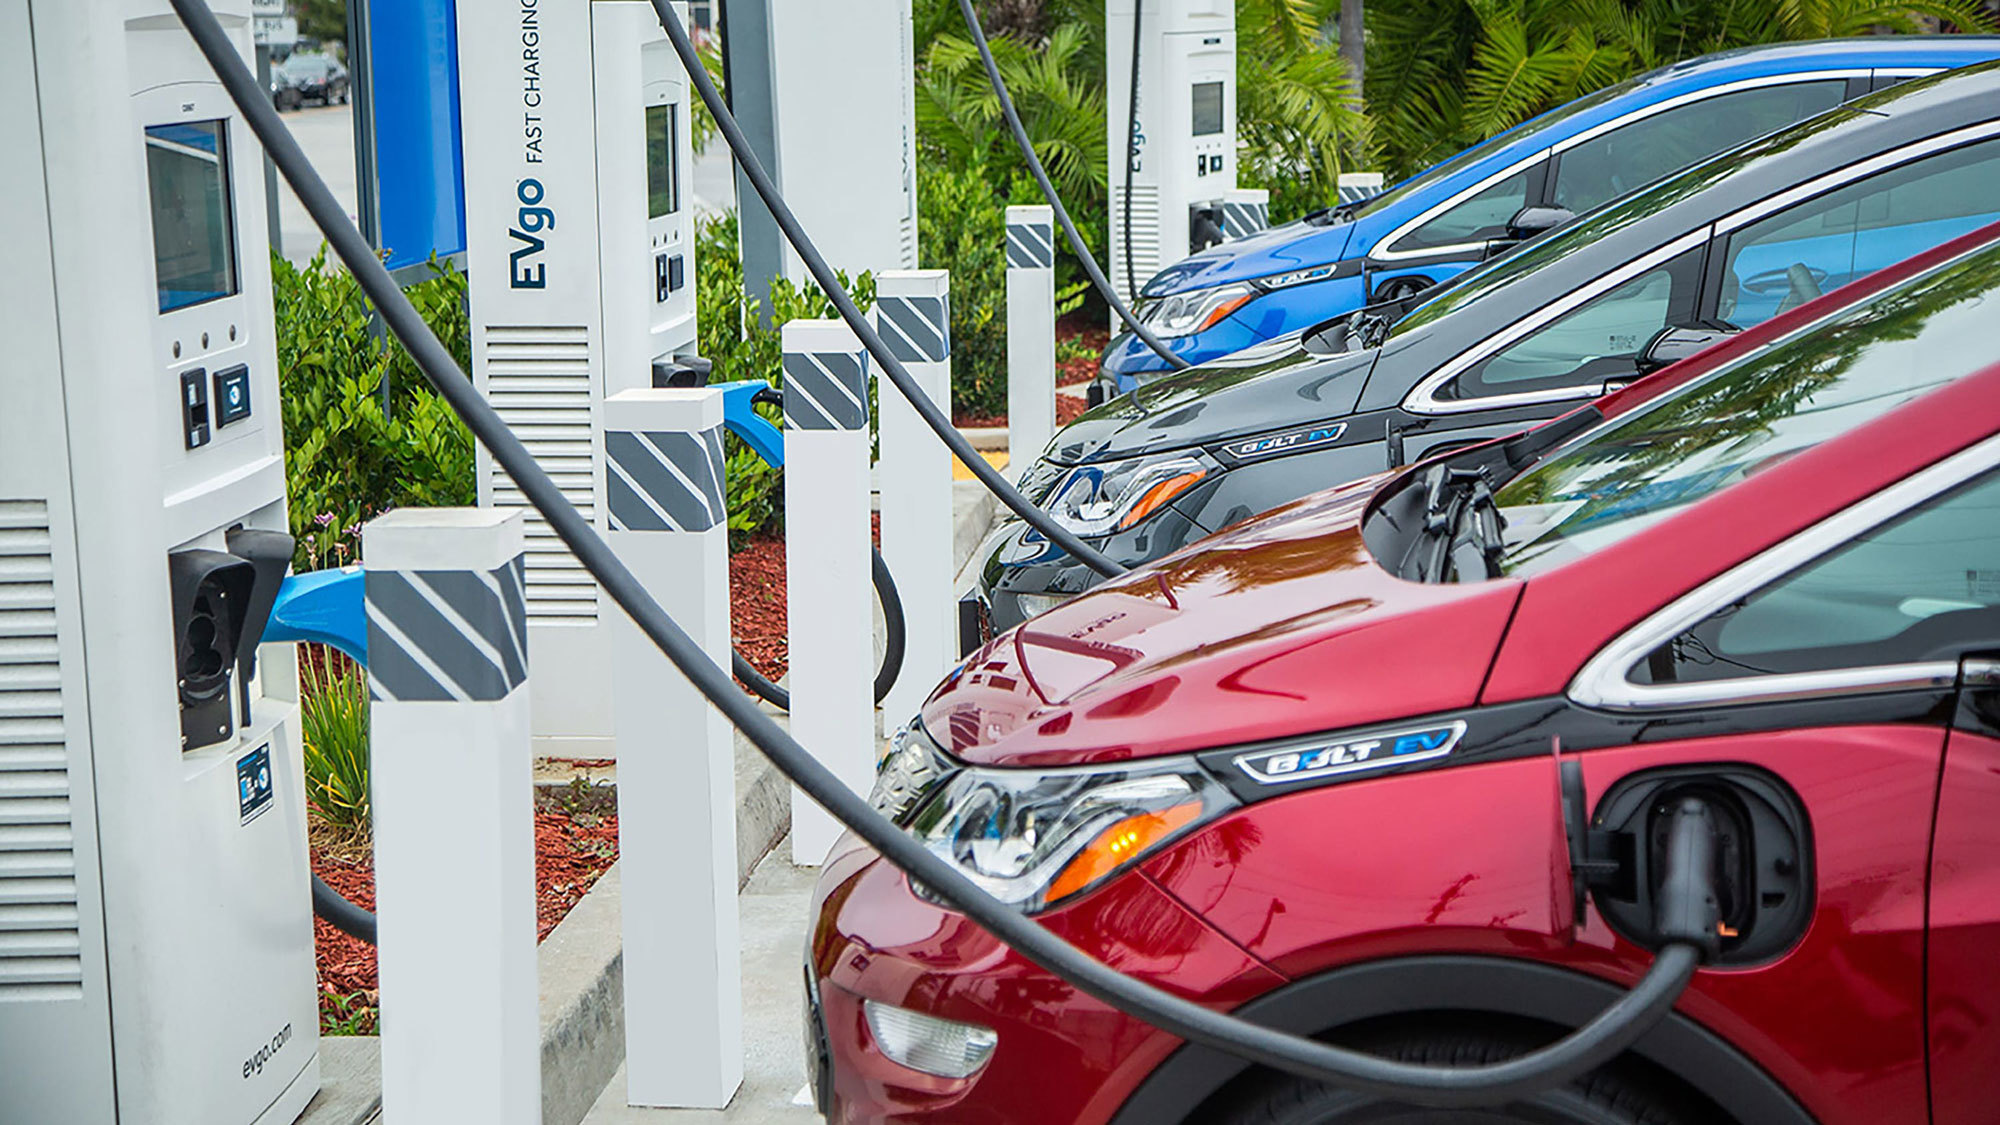 EV Turning Point Momentum Builds for U.S. Electric Vehicle Transition